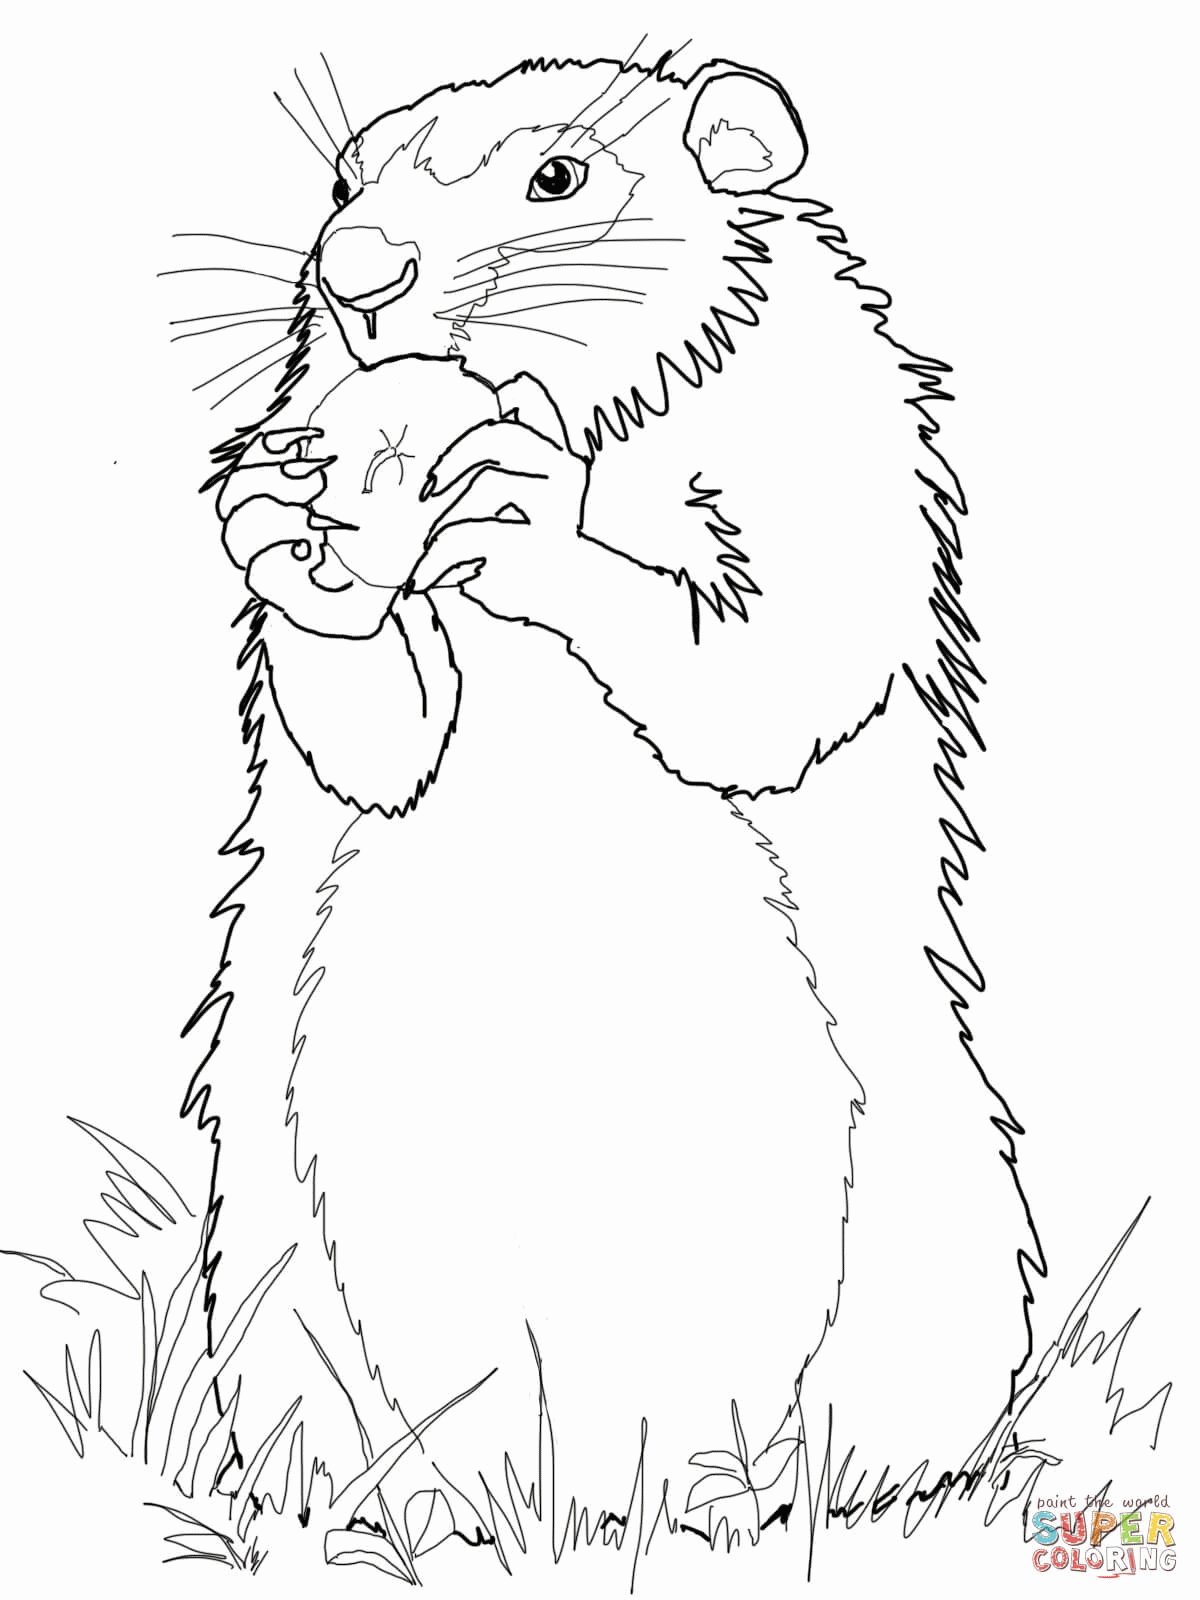 free-groundhog-day-coloring-pages-free-printable-download-free